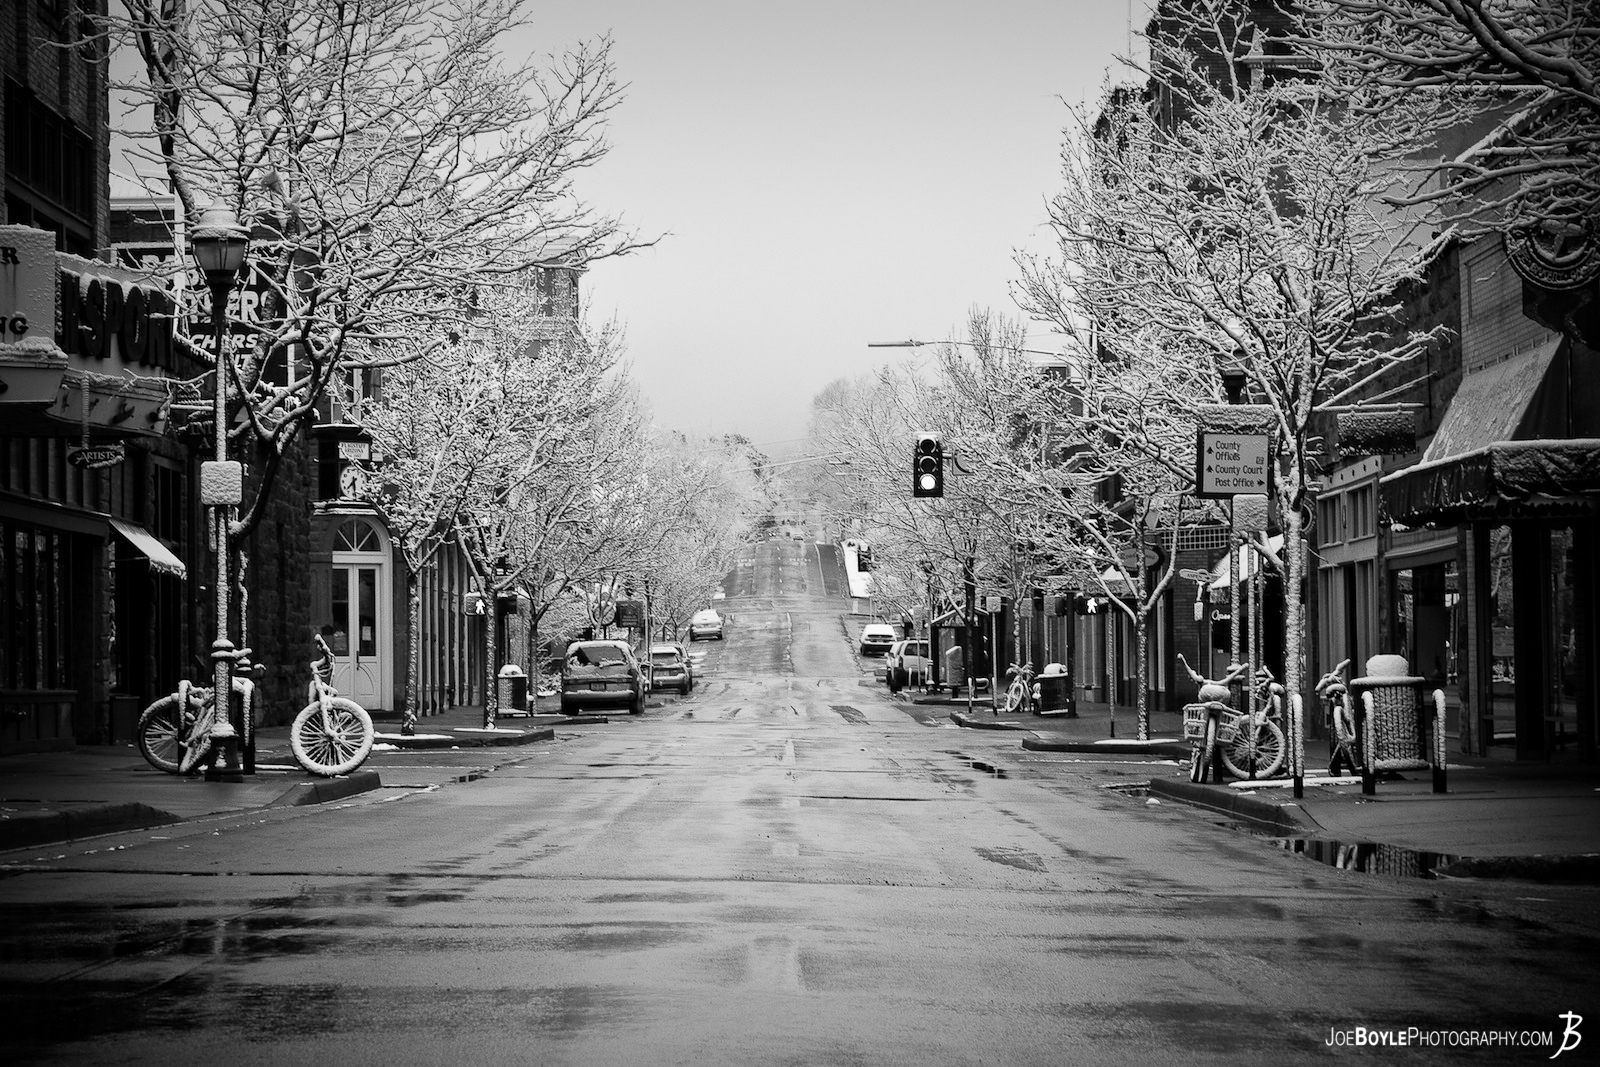  This image has won 4 awards on Pixoto.com! One of which was for being in the top 10% of all images submitted throughout 2012! I captured this image after a surprise snowfall in downtown Flagstaff. Caught in the morning hours on a weekend lended itself to very little street traffic! 